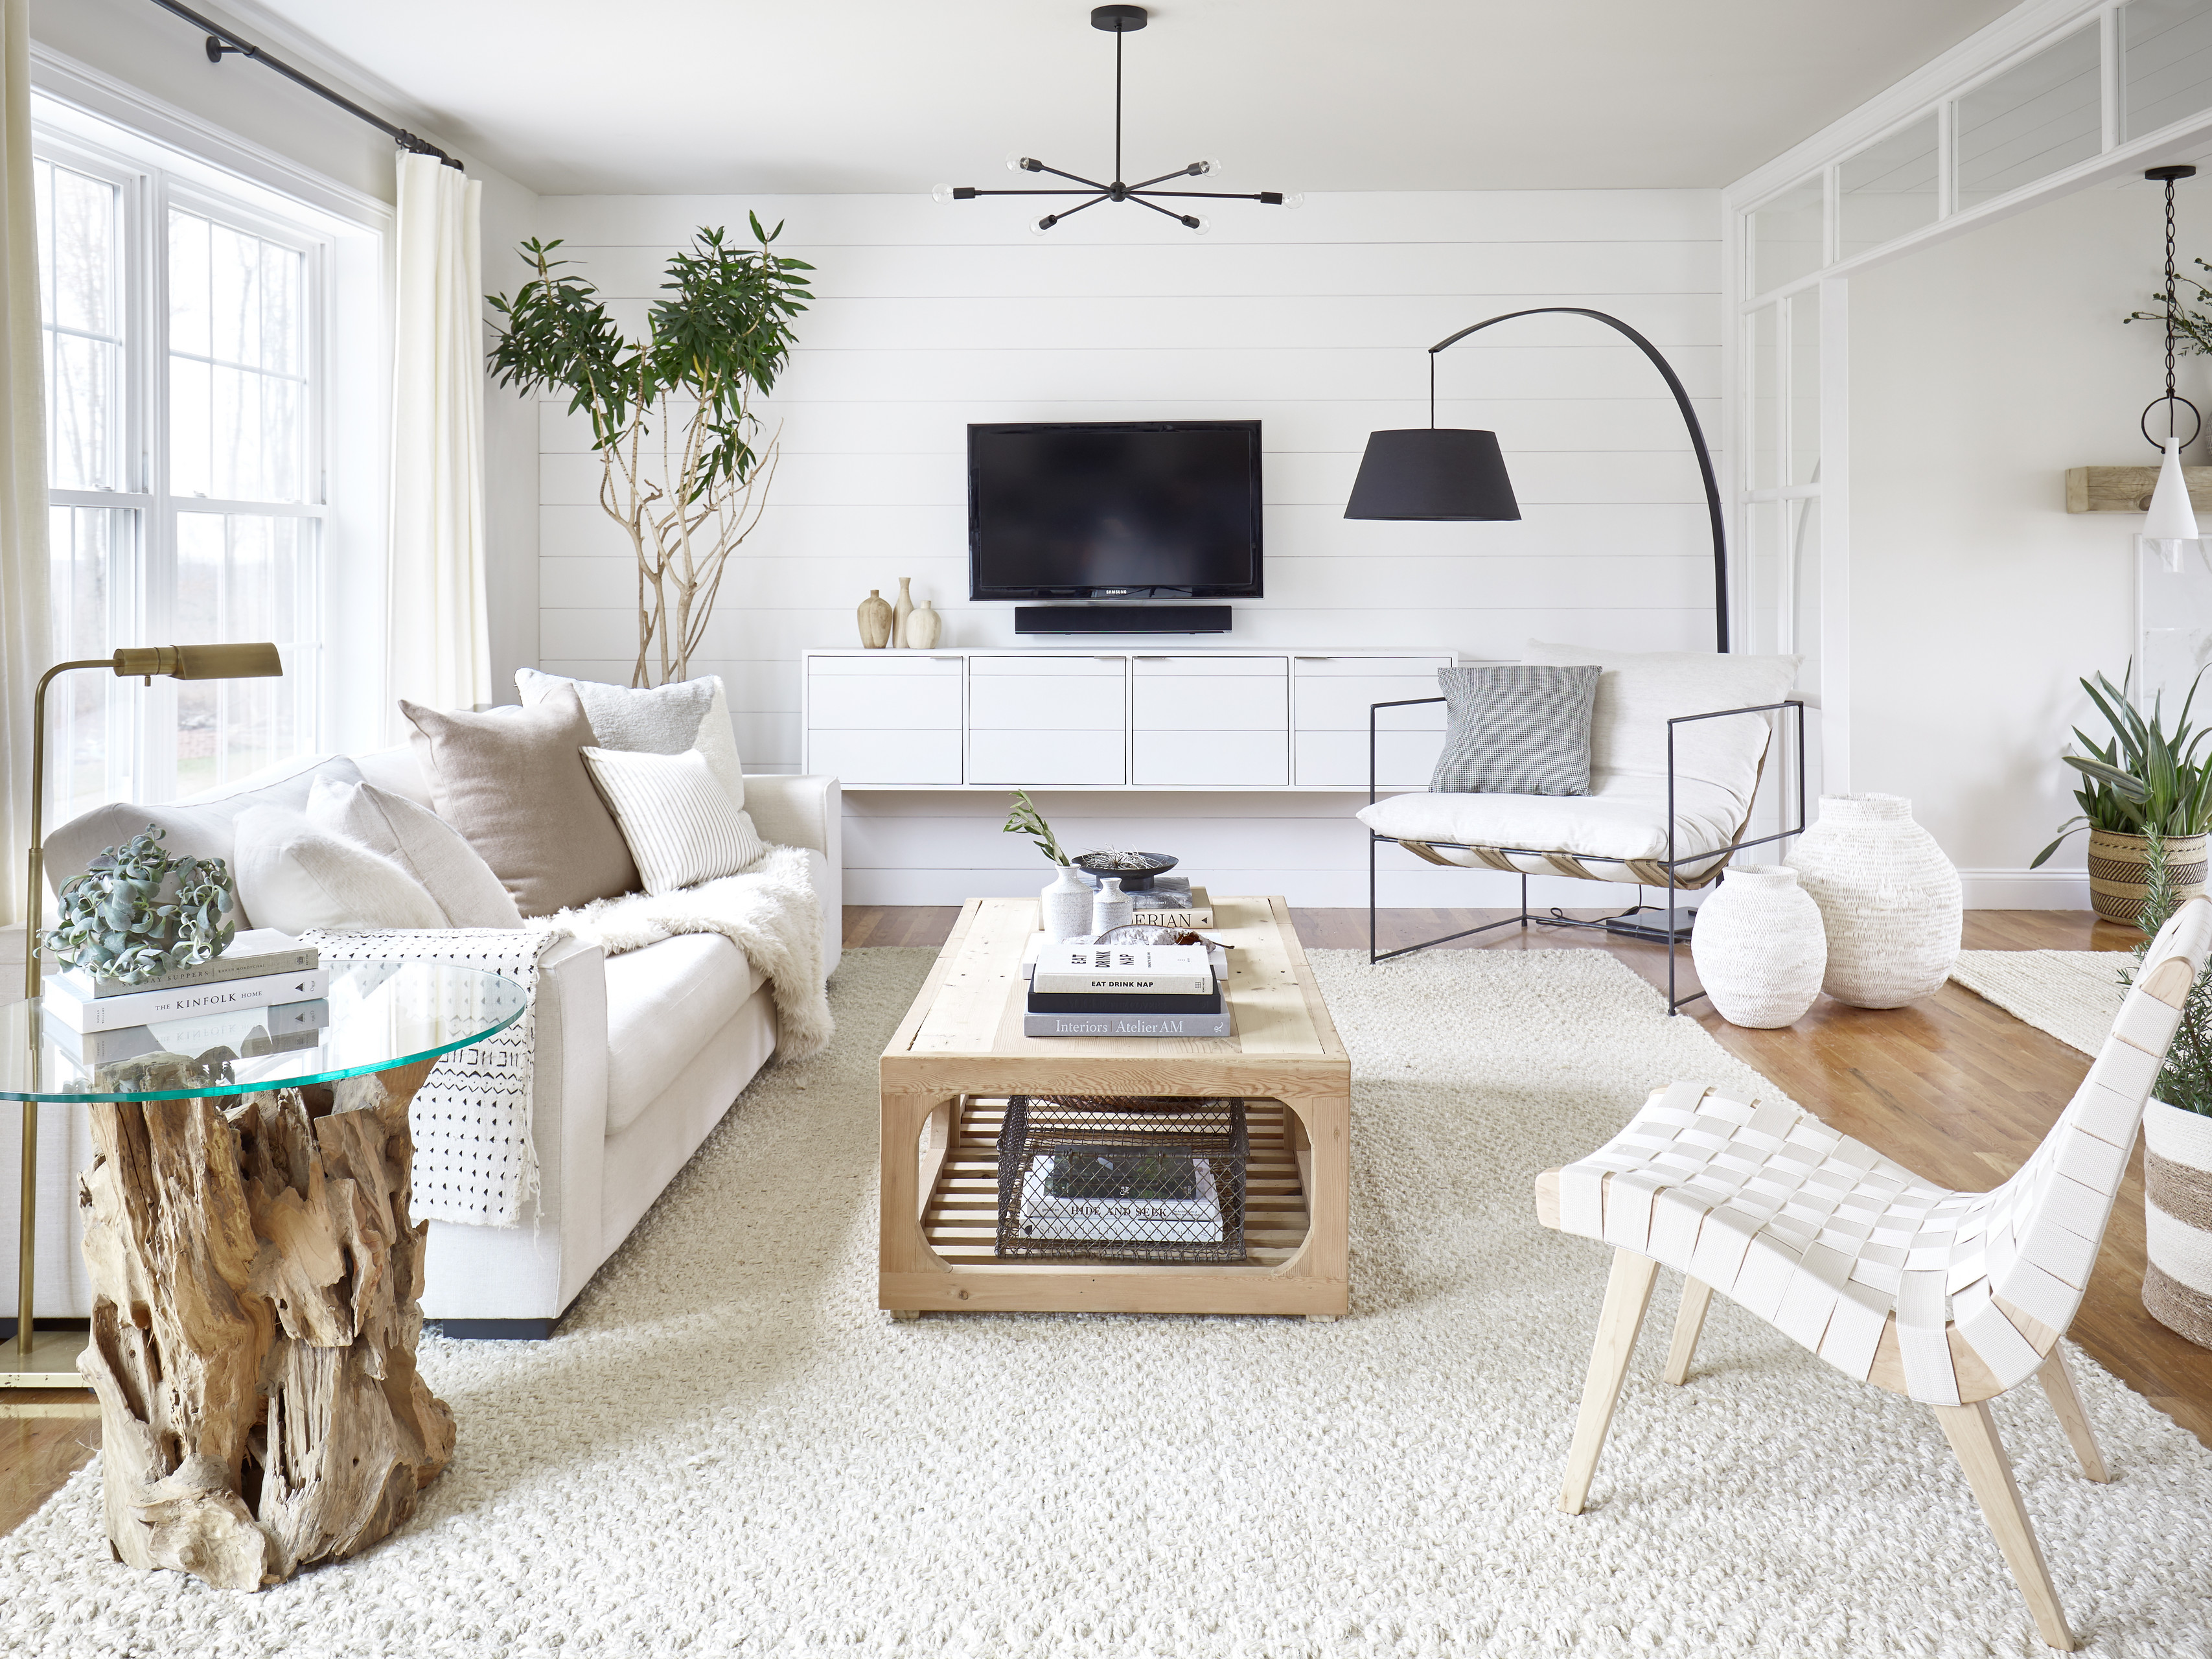 20 Small Living Room Ideas You'll Love   July, 20   Houzz